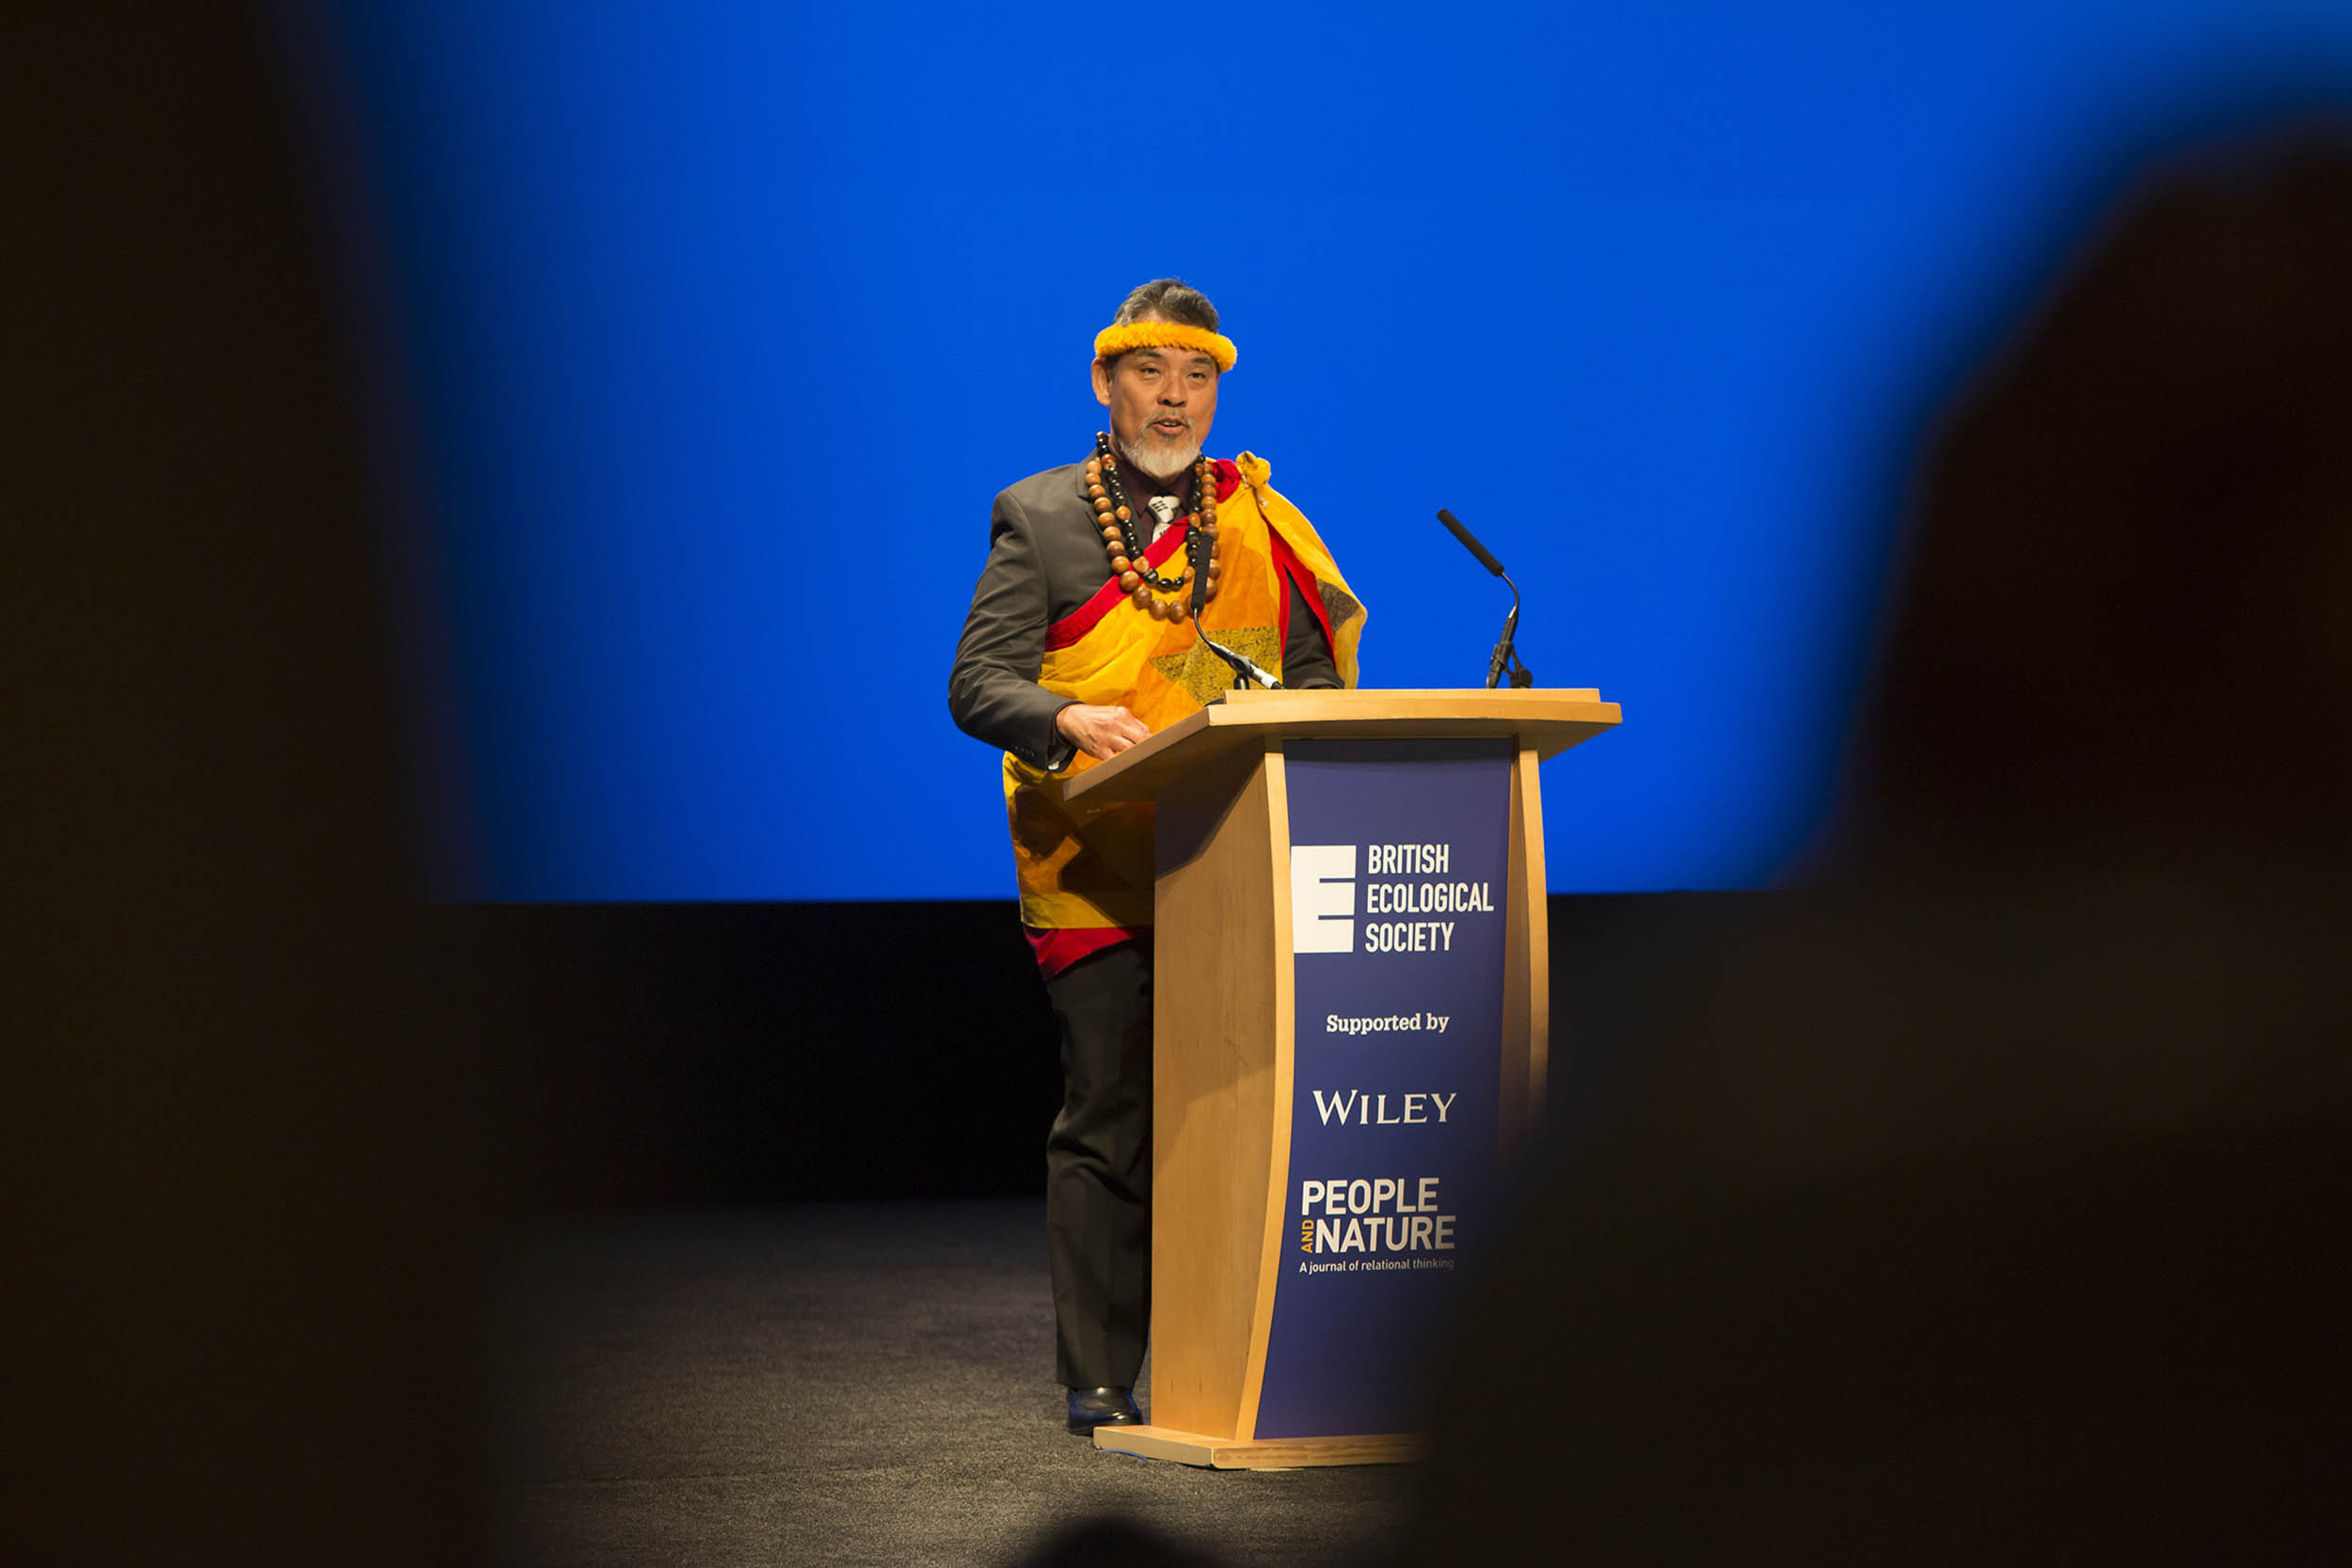  A photograph taken at a conference in Edinburgh of the British Ecological Society 